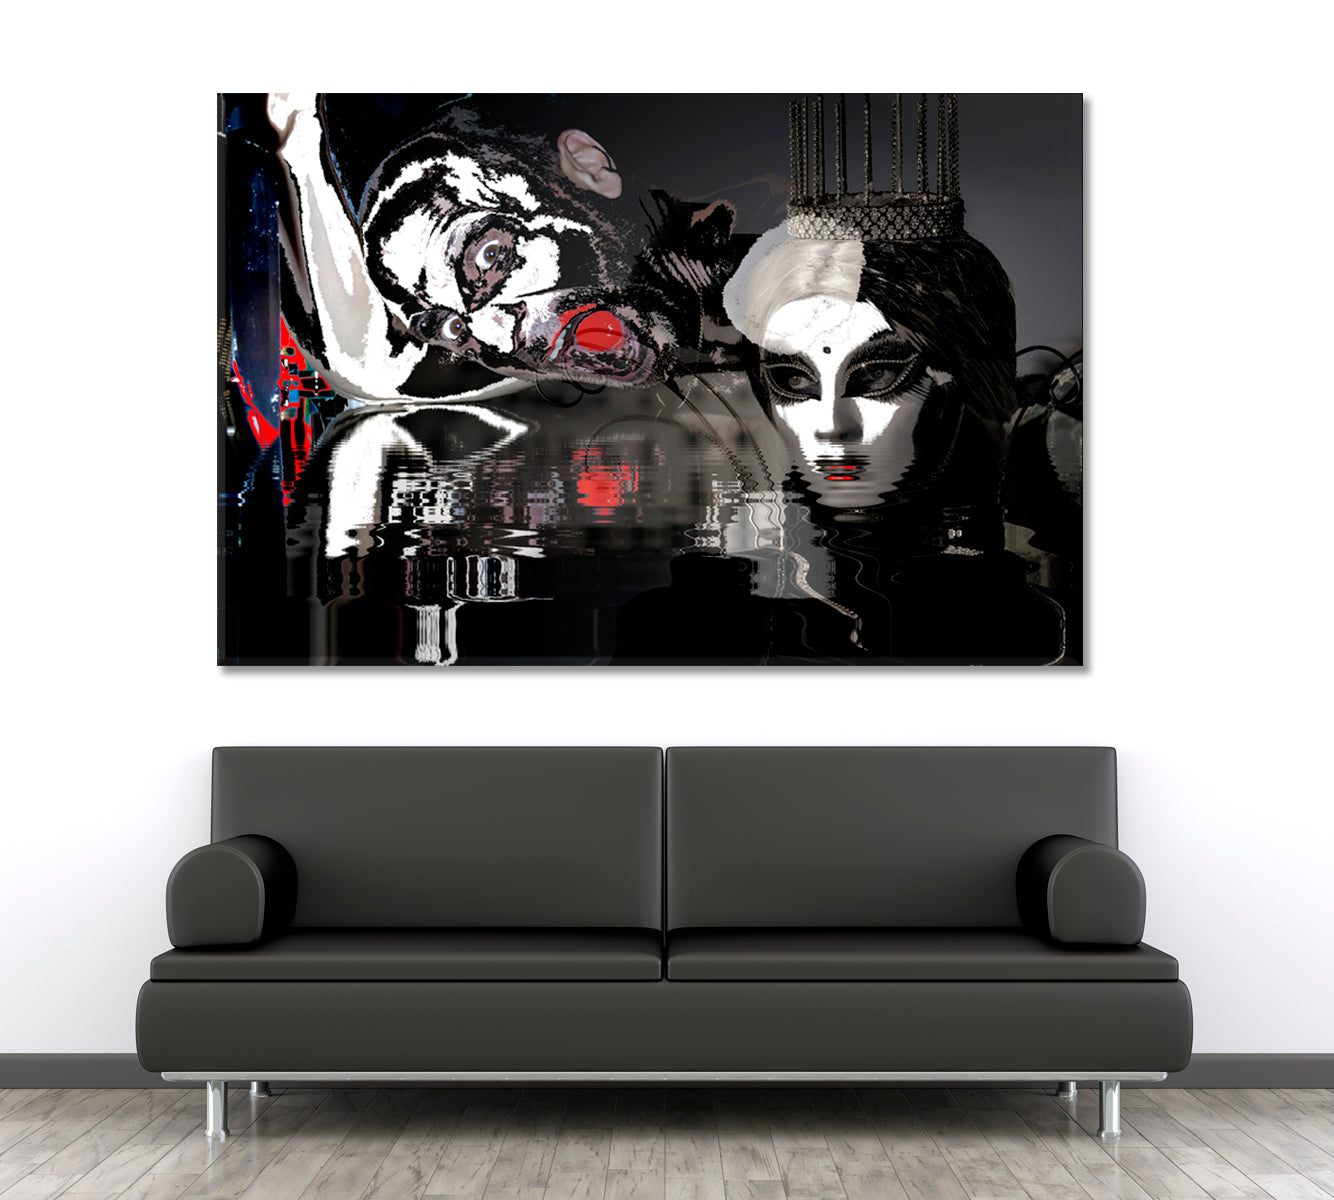 Mysterious Glamour Princess White Mask Crown Screaming Man Surreal Art Surreal Fantasy Large Art Print Décor Artesty 1 panel 24" x 16" 